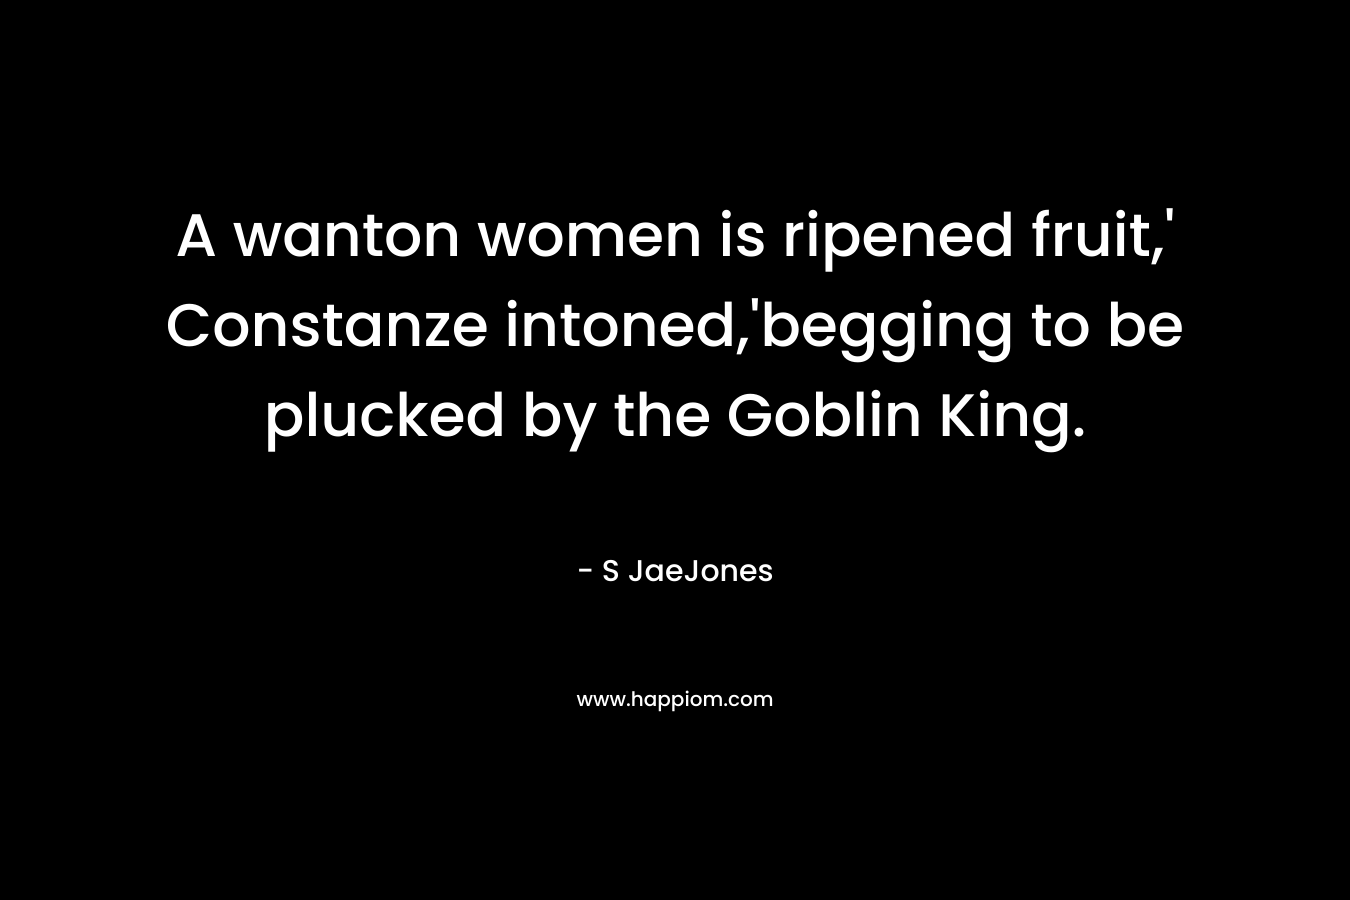 A wanton women is ripened fruit,' Constanze intoned,'begging to be plucked by the Goblin King.